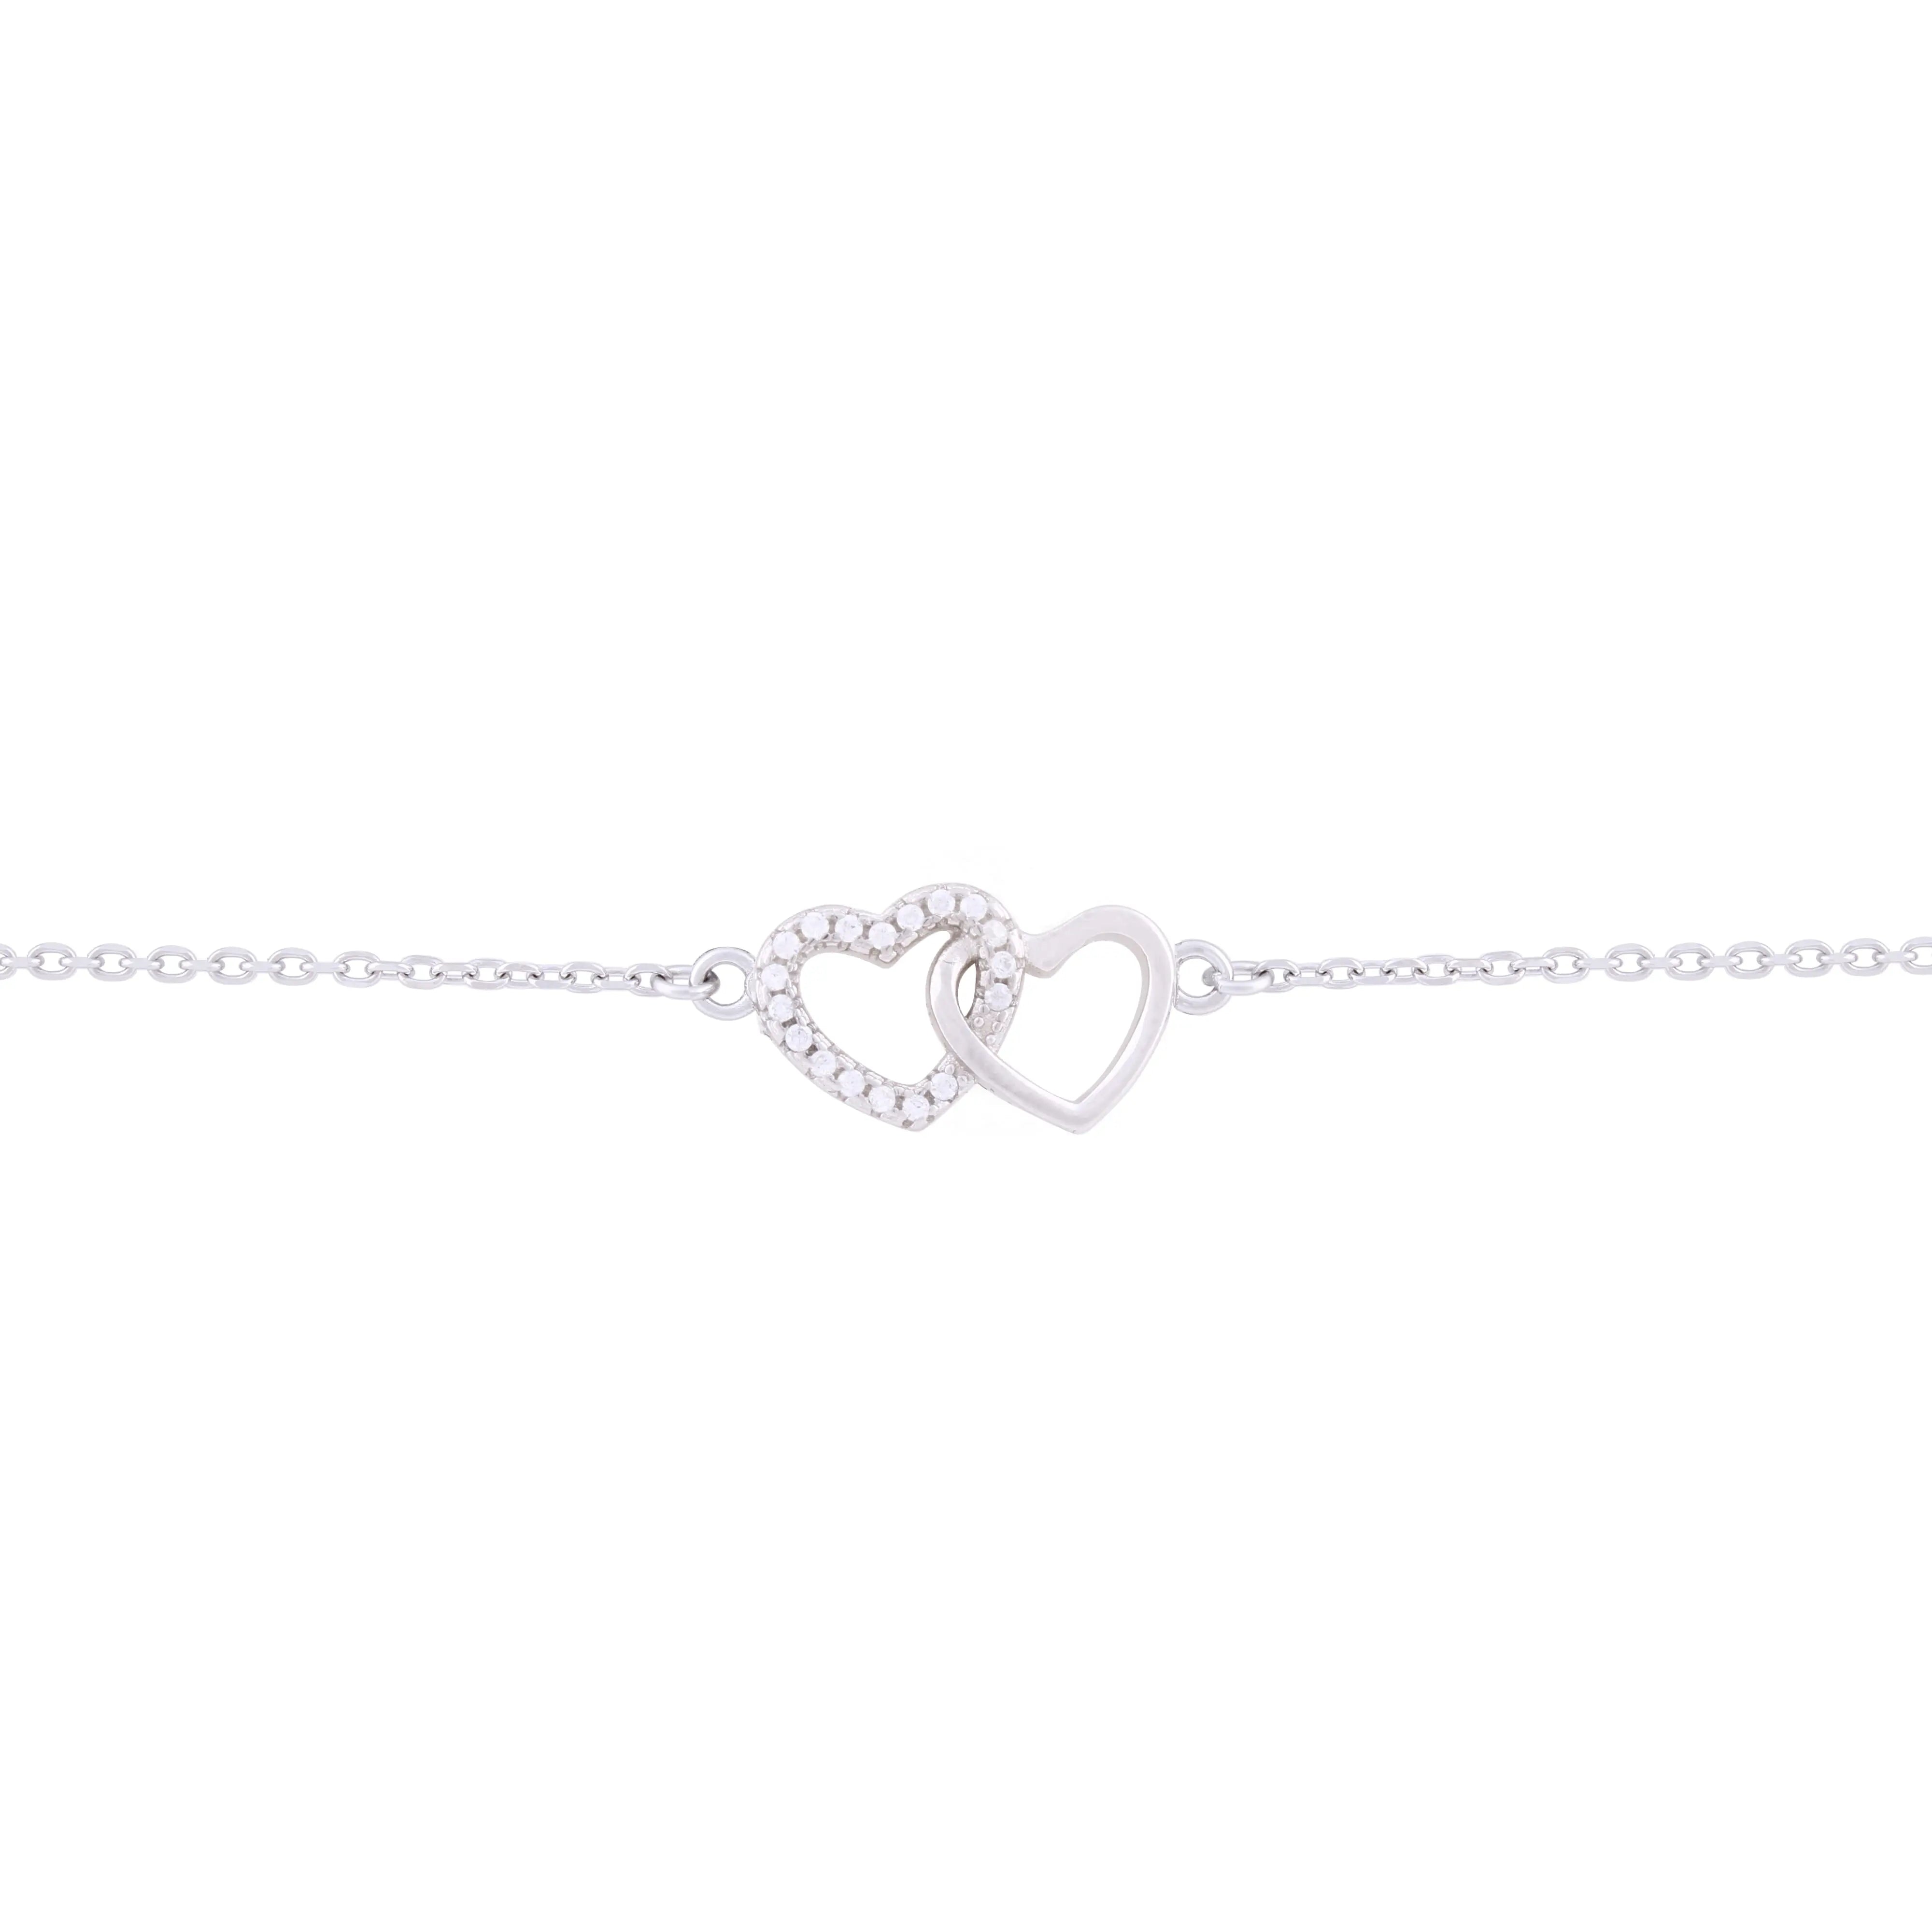 Asfour Hearts Chain Bracelet in 925 Sterling Silver